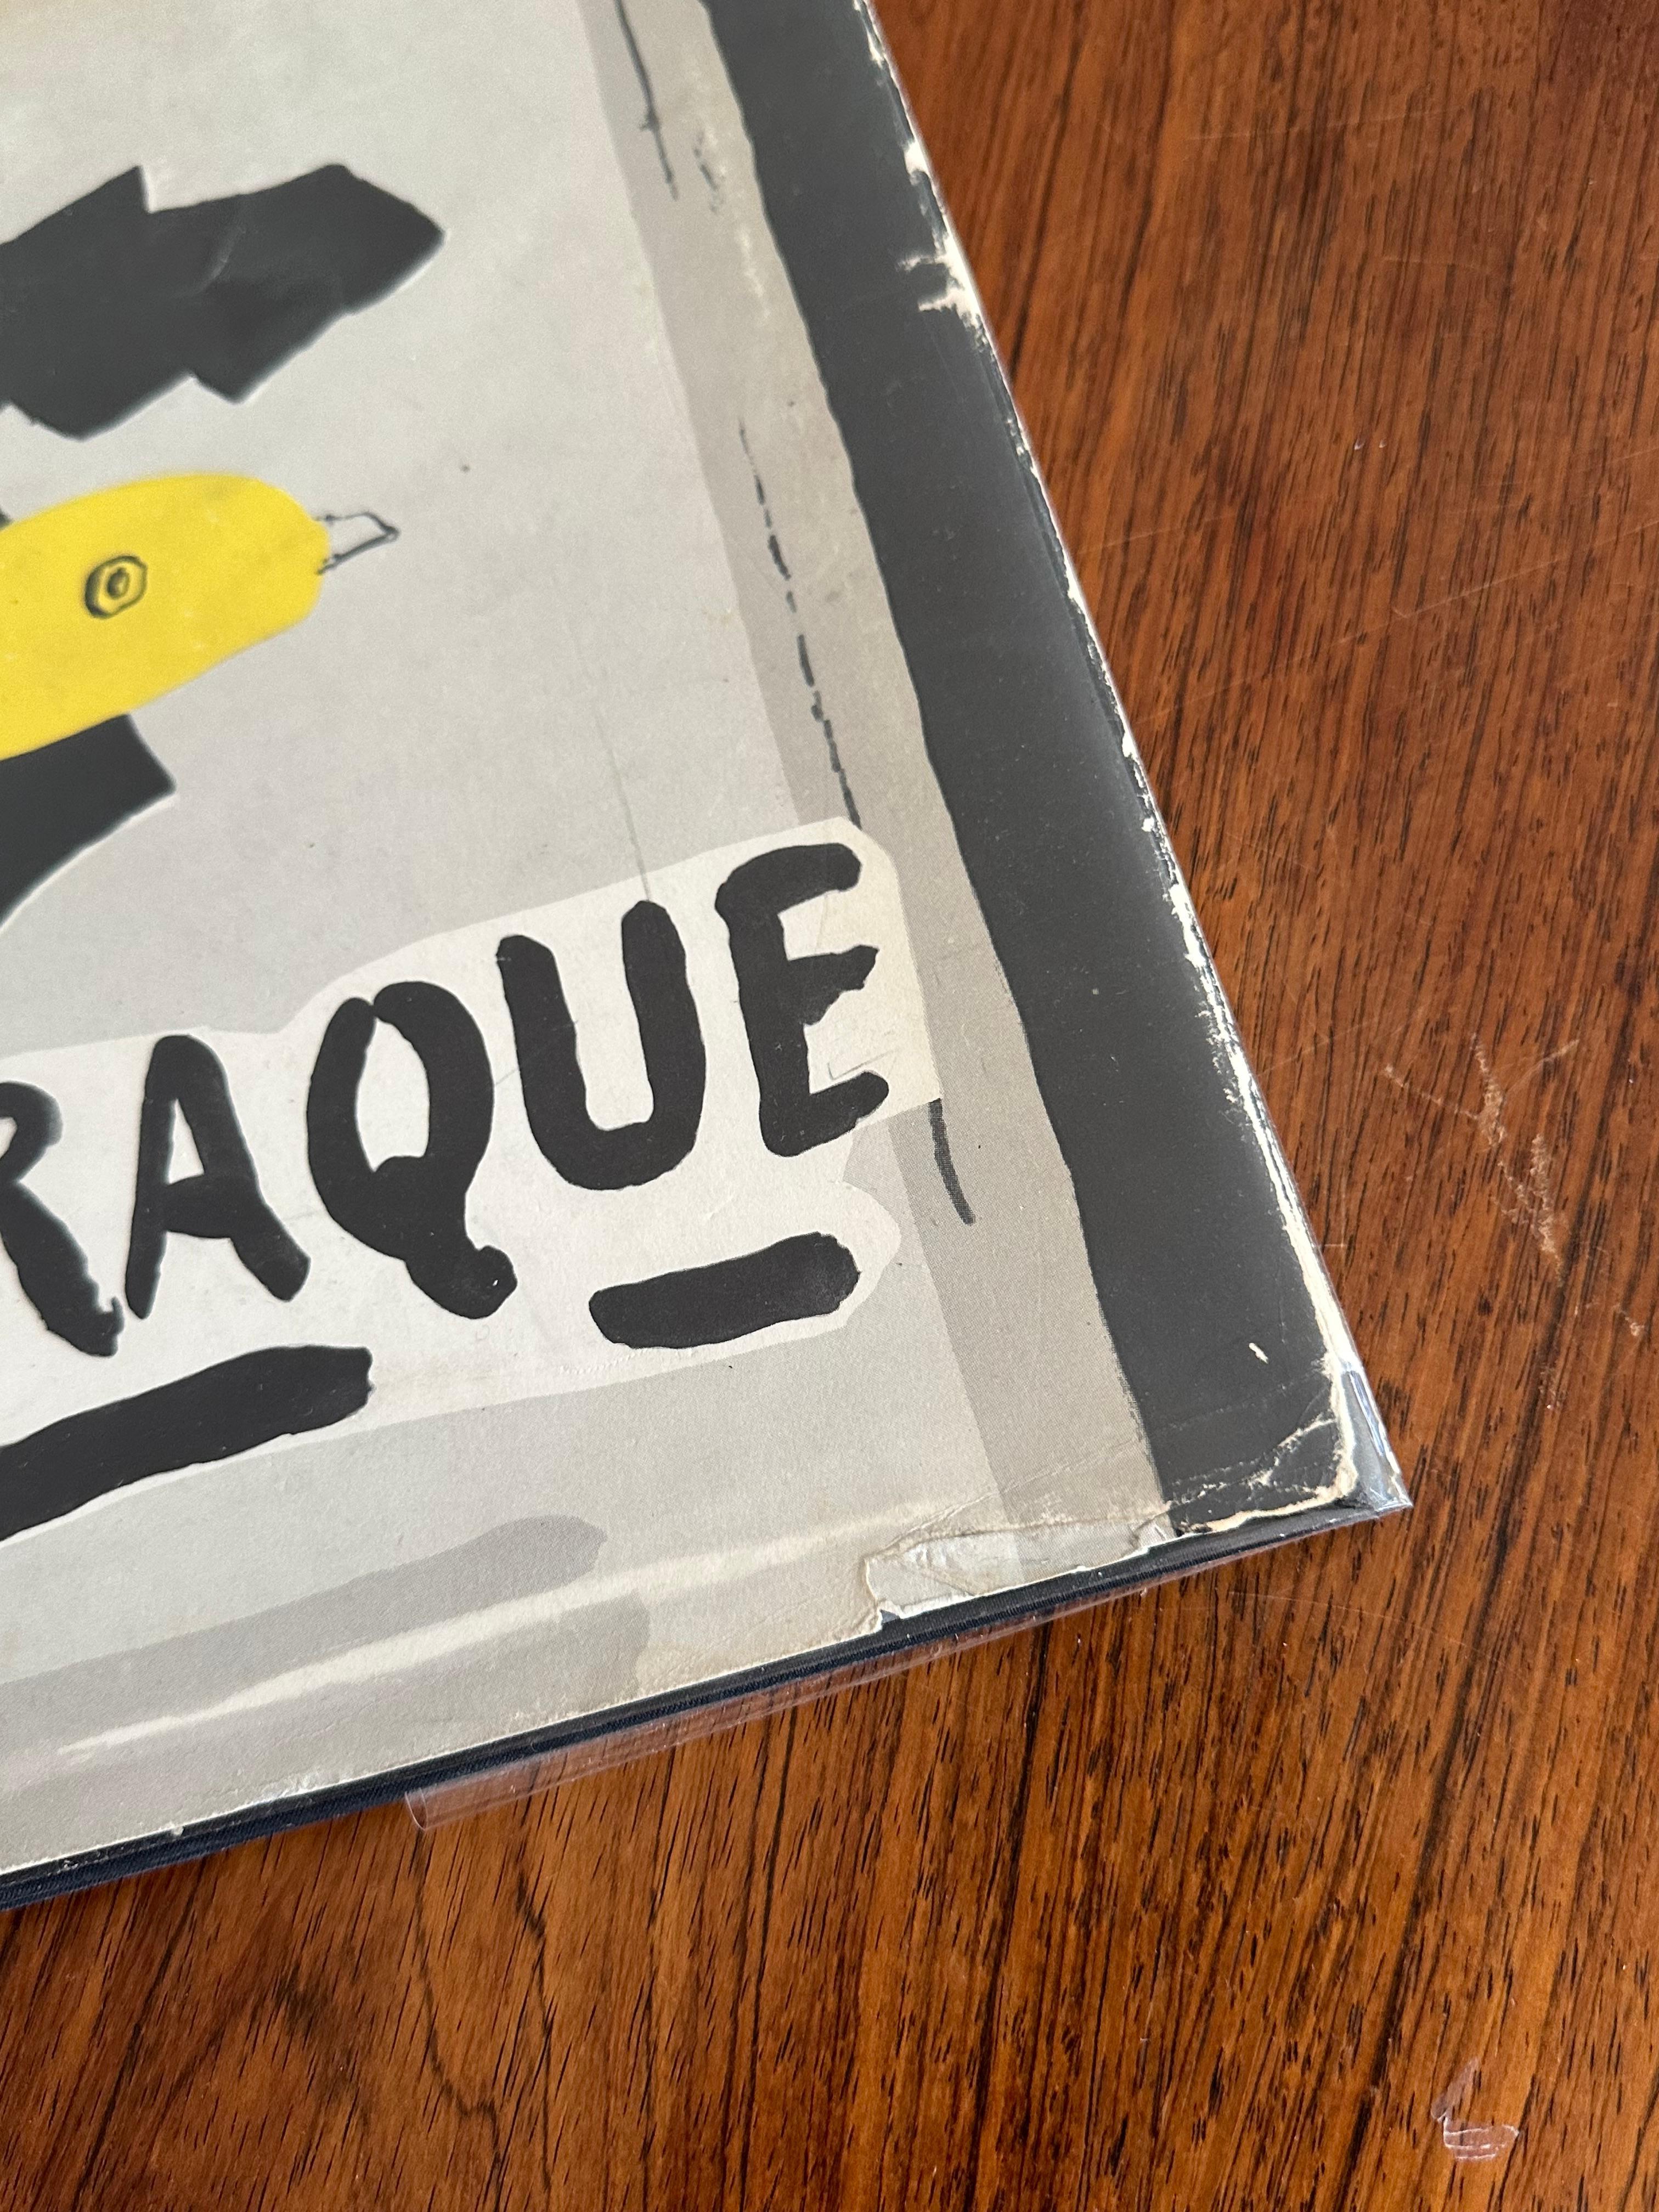 Vintage book of art prints of the inimitable George’s Braque. Entitled “L'OEUVRE GRAPHIQUE DE GEORGES BRAQUE” and printed in French. Beautifully printed lithographs in color and black and white. Features original paper dust cover in decent shape.